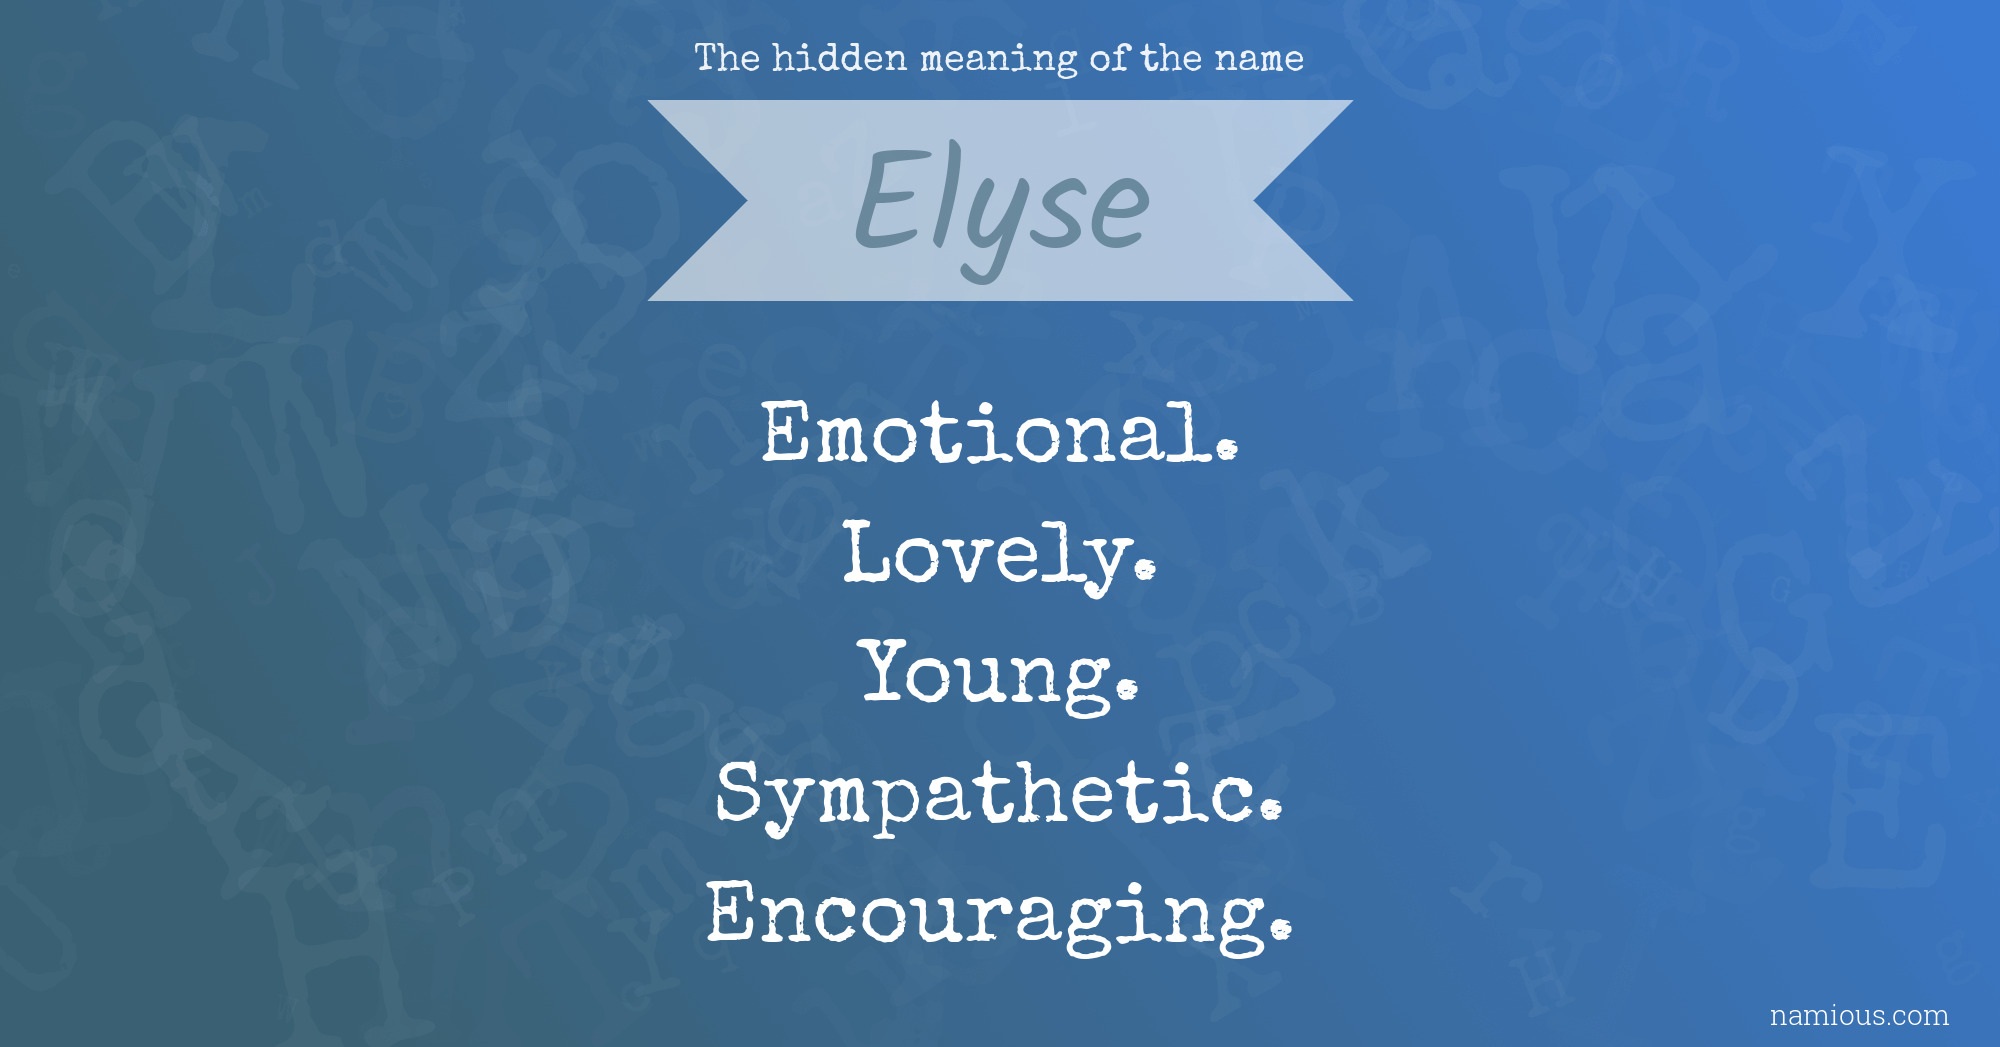 The hidden meaning of the name Elyse